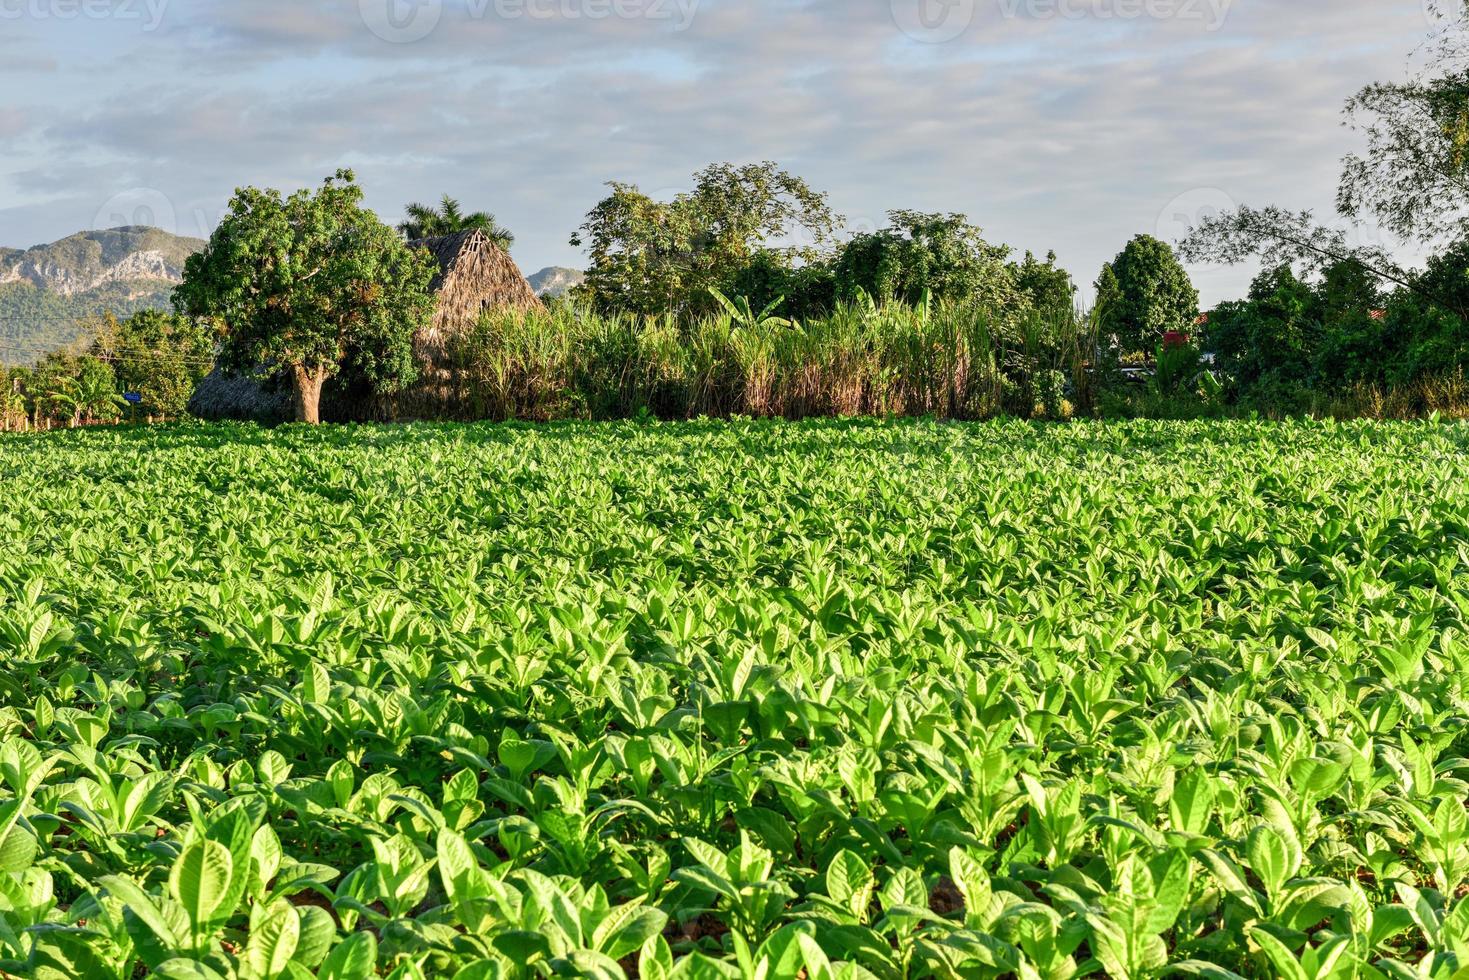 Tobacco field in the Vinales valley, north of Cuba. photo